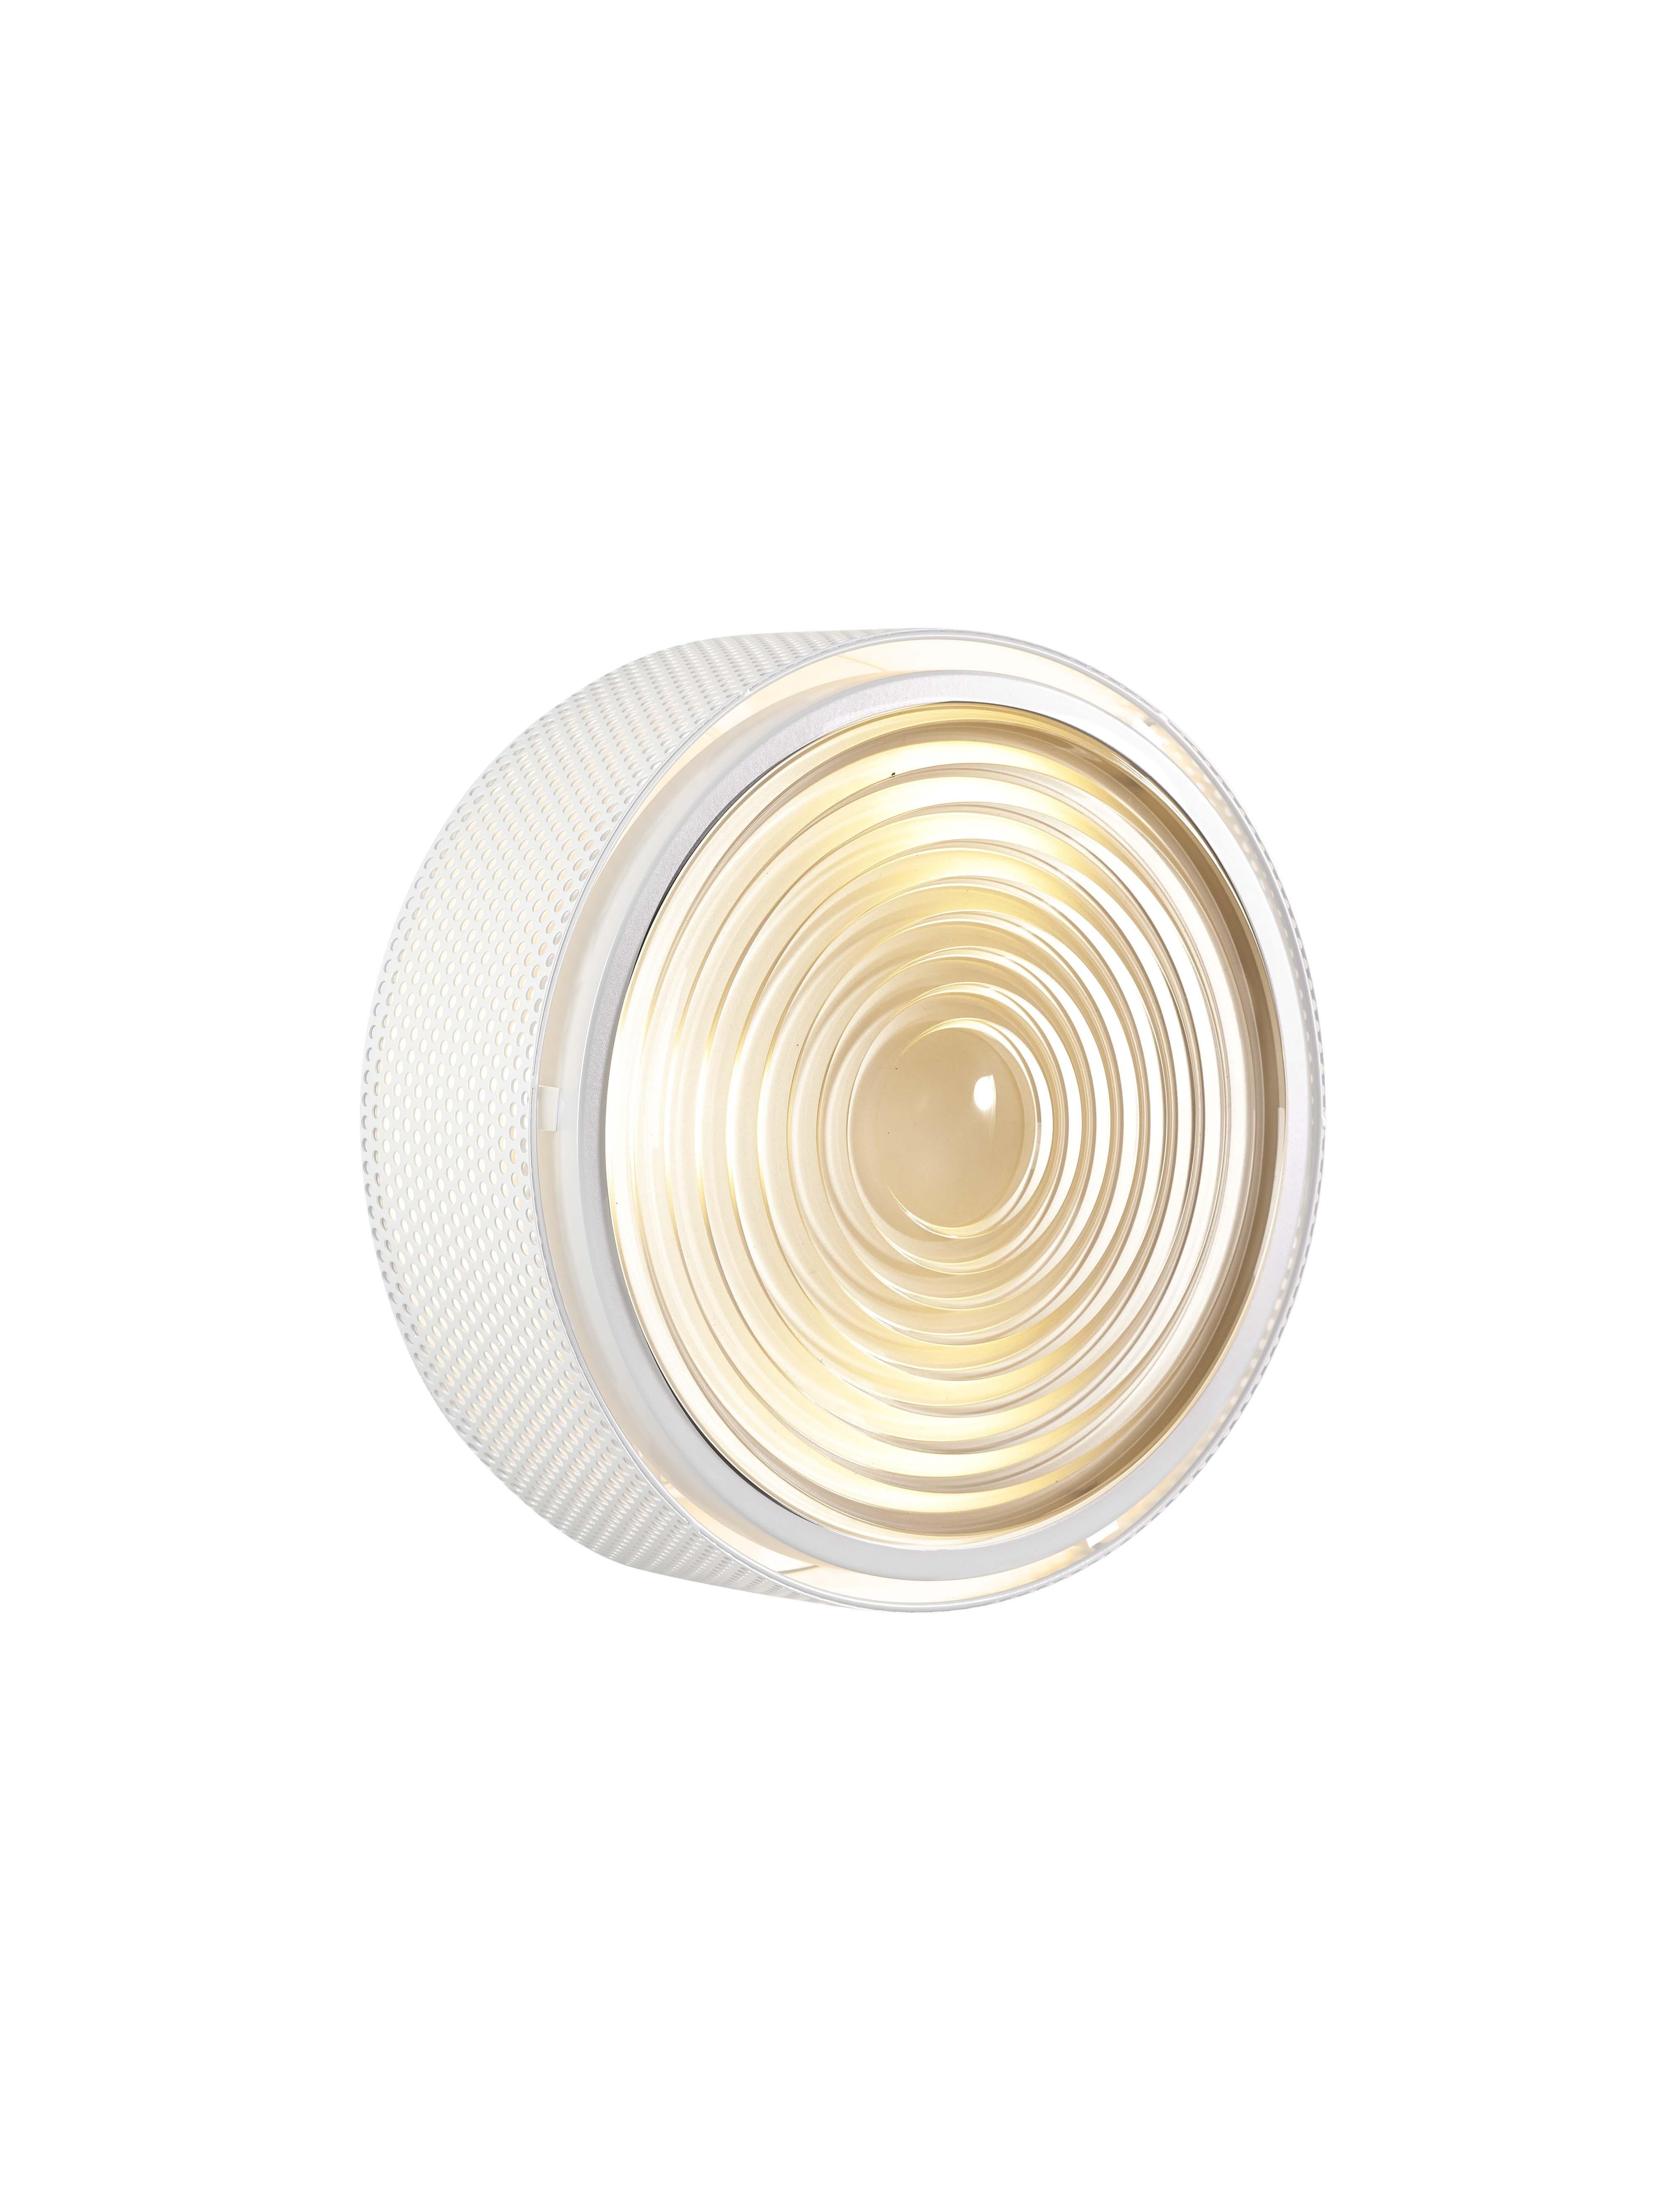 Large Pierre Guariche 'G13' Wall or Ceiling Light for Sammode Studio in White For Sale 2